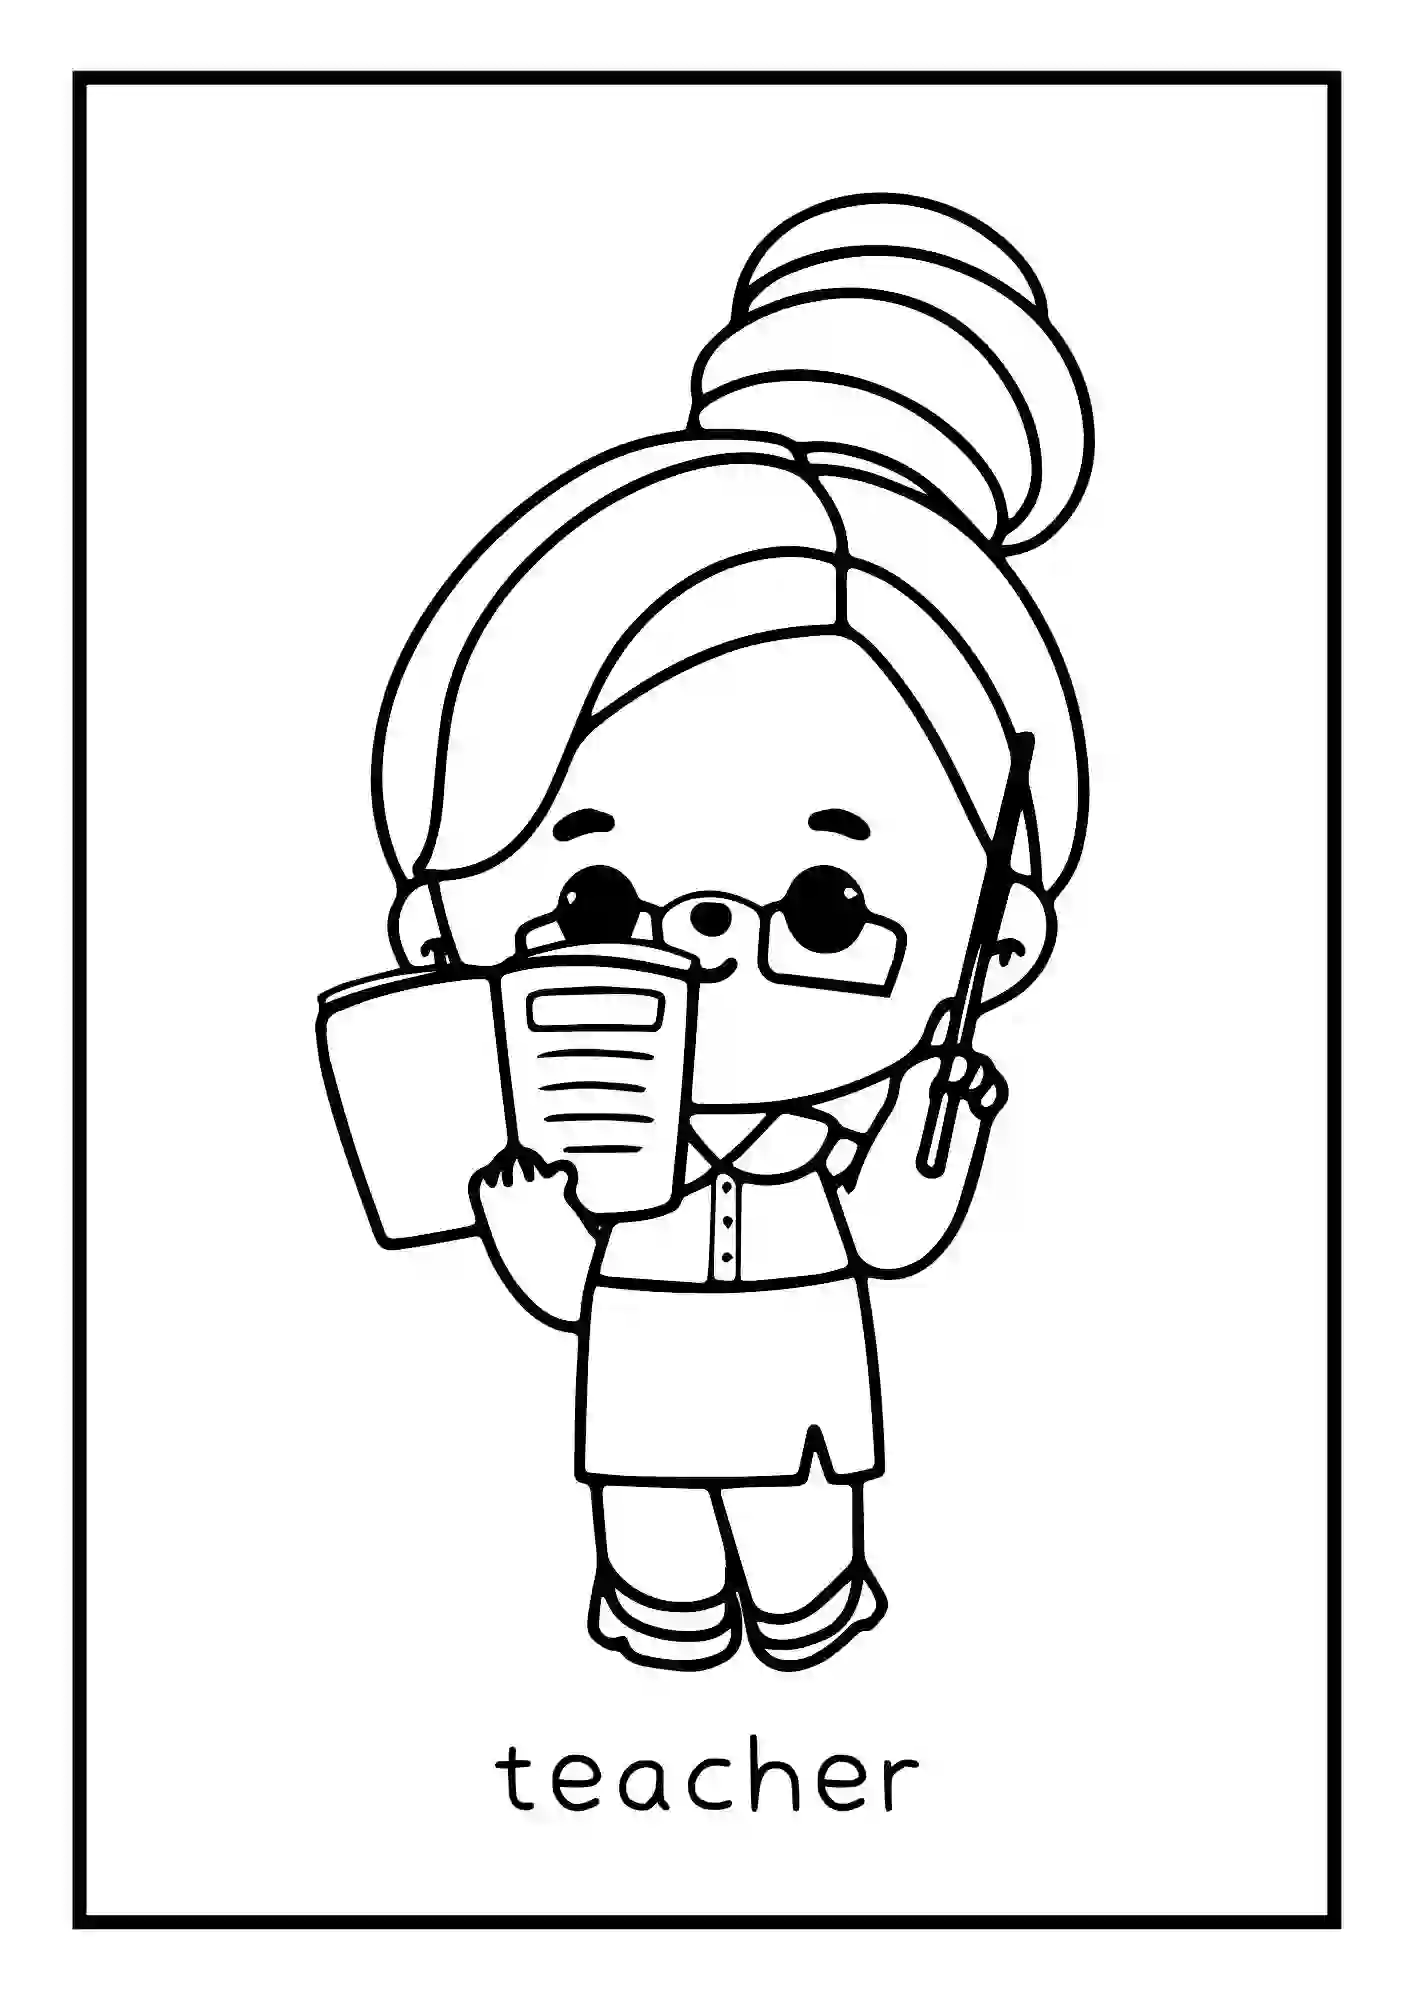 Different Professions, occupations, carriers, jobs, Coloring Worksheets (teacher)